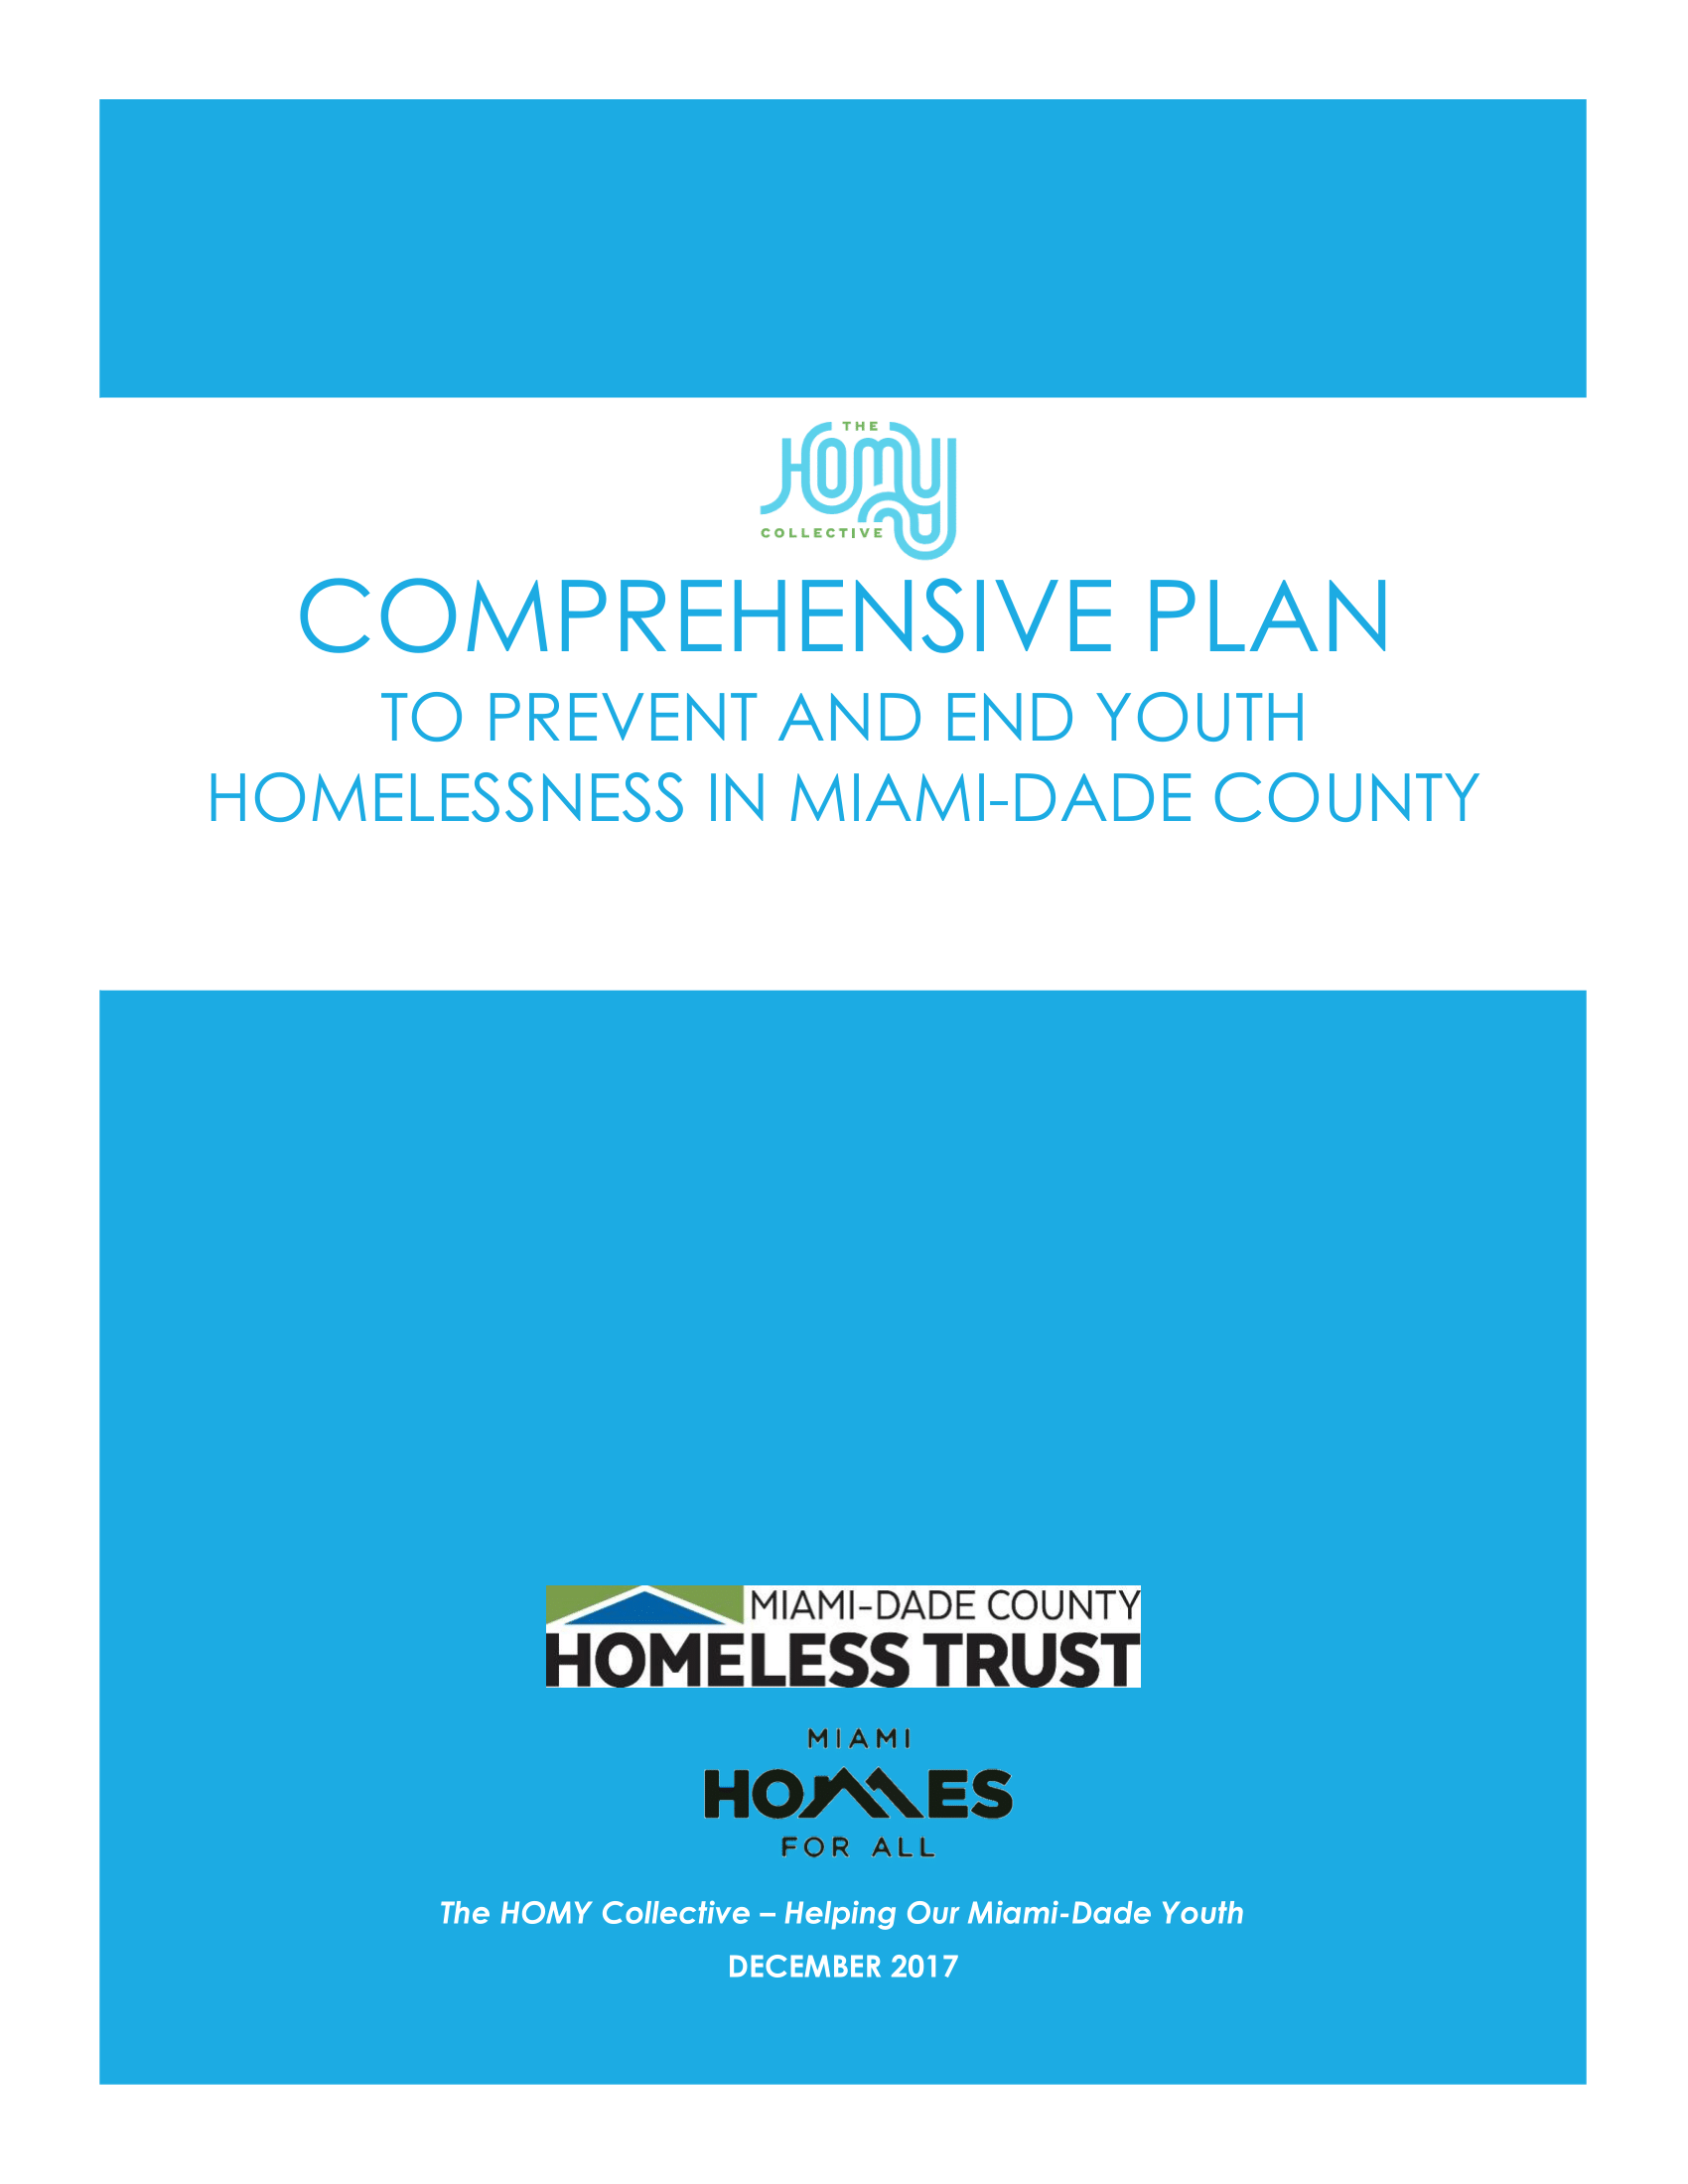 Comprehensive+Plan+to+End+and+Prevent+Homelessness+in+Miami-Dade+County+-+December+2017-01.png